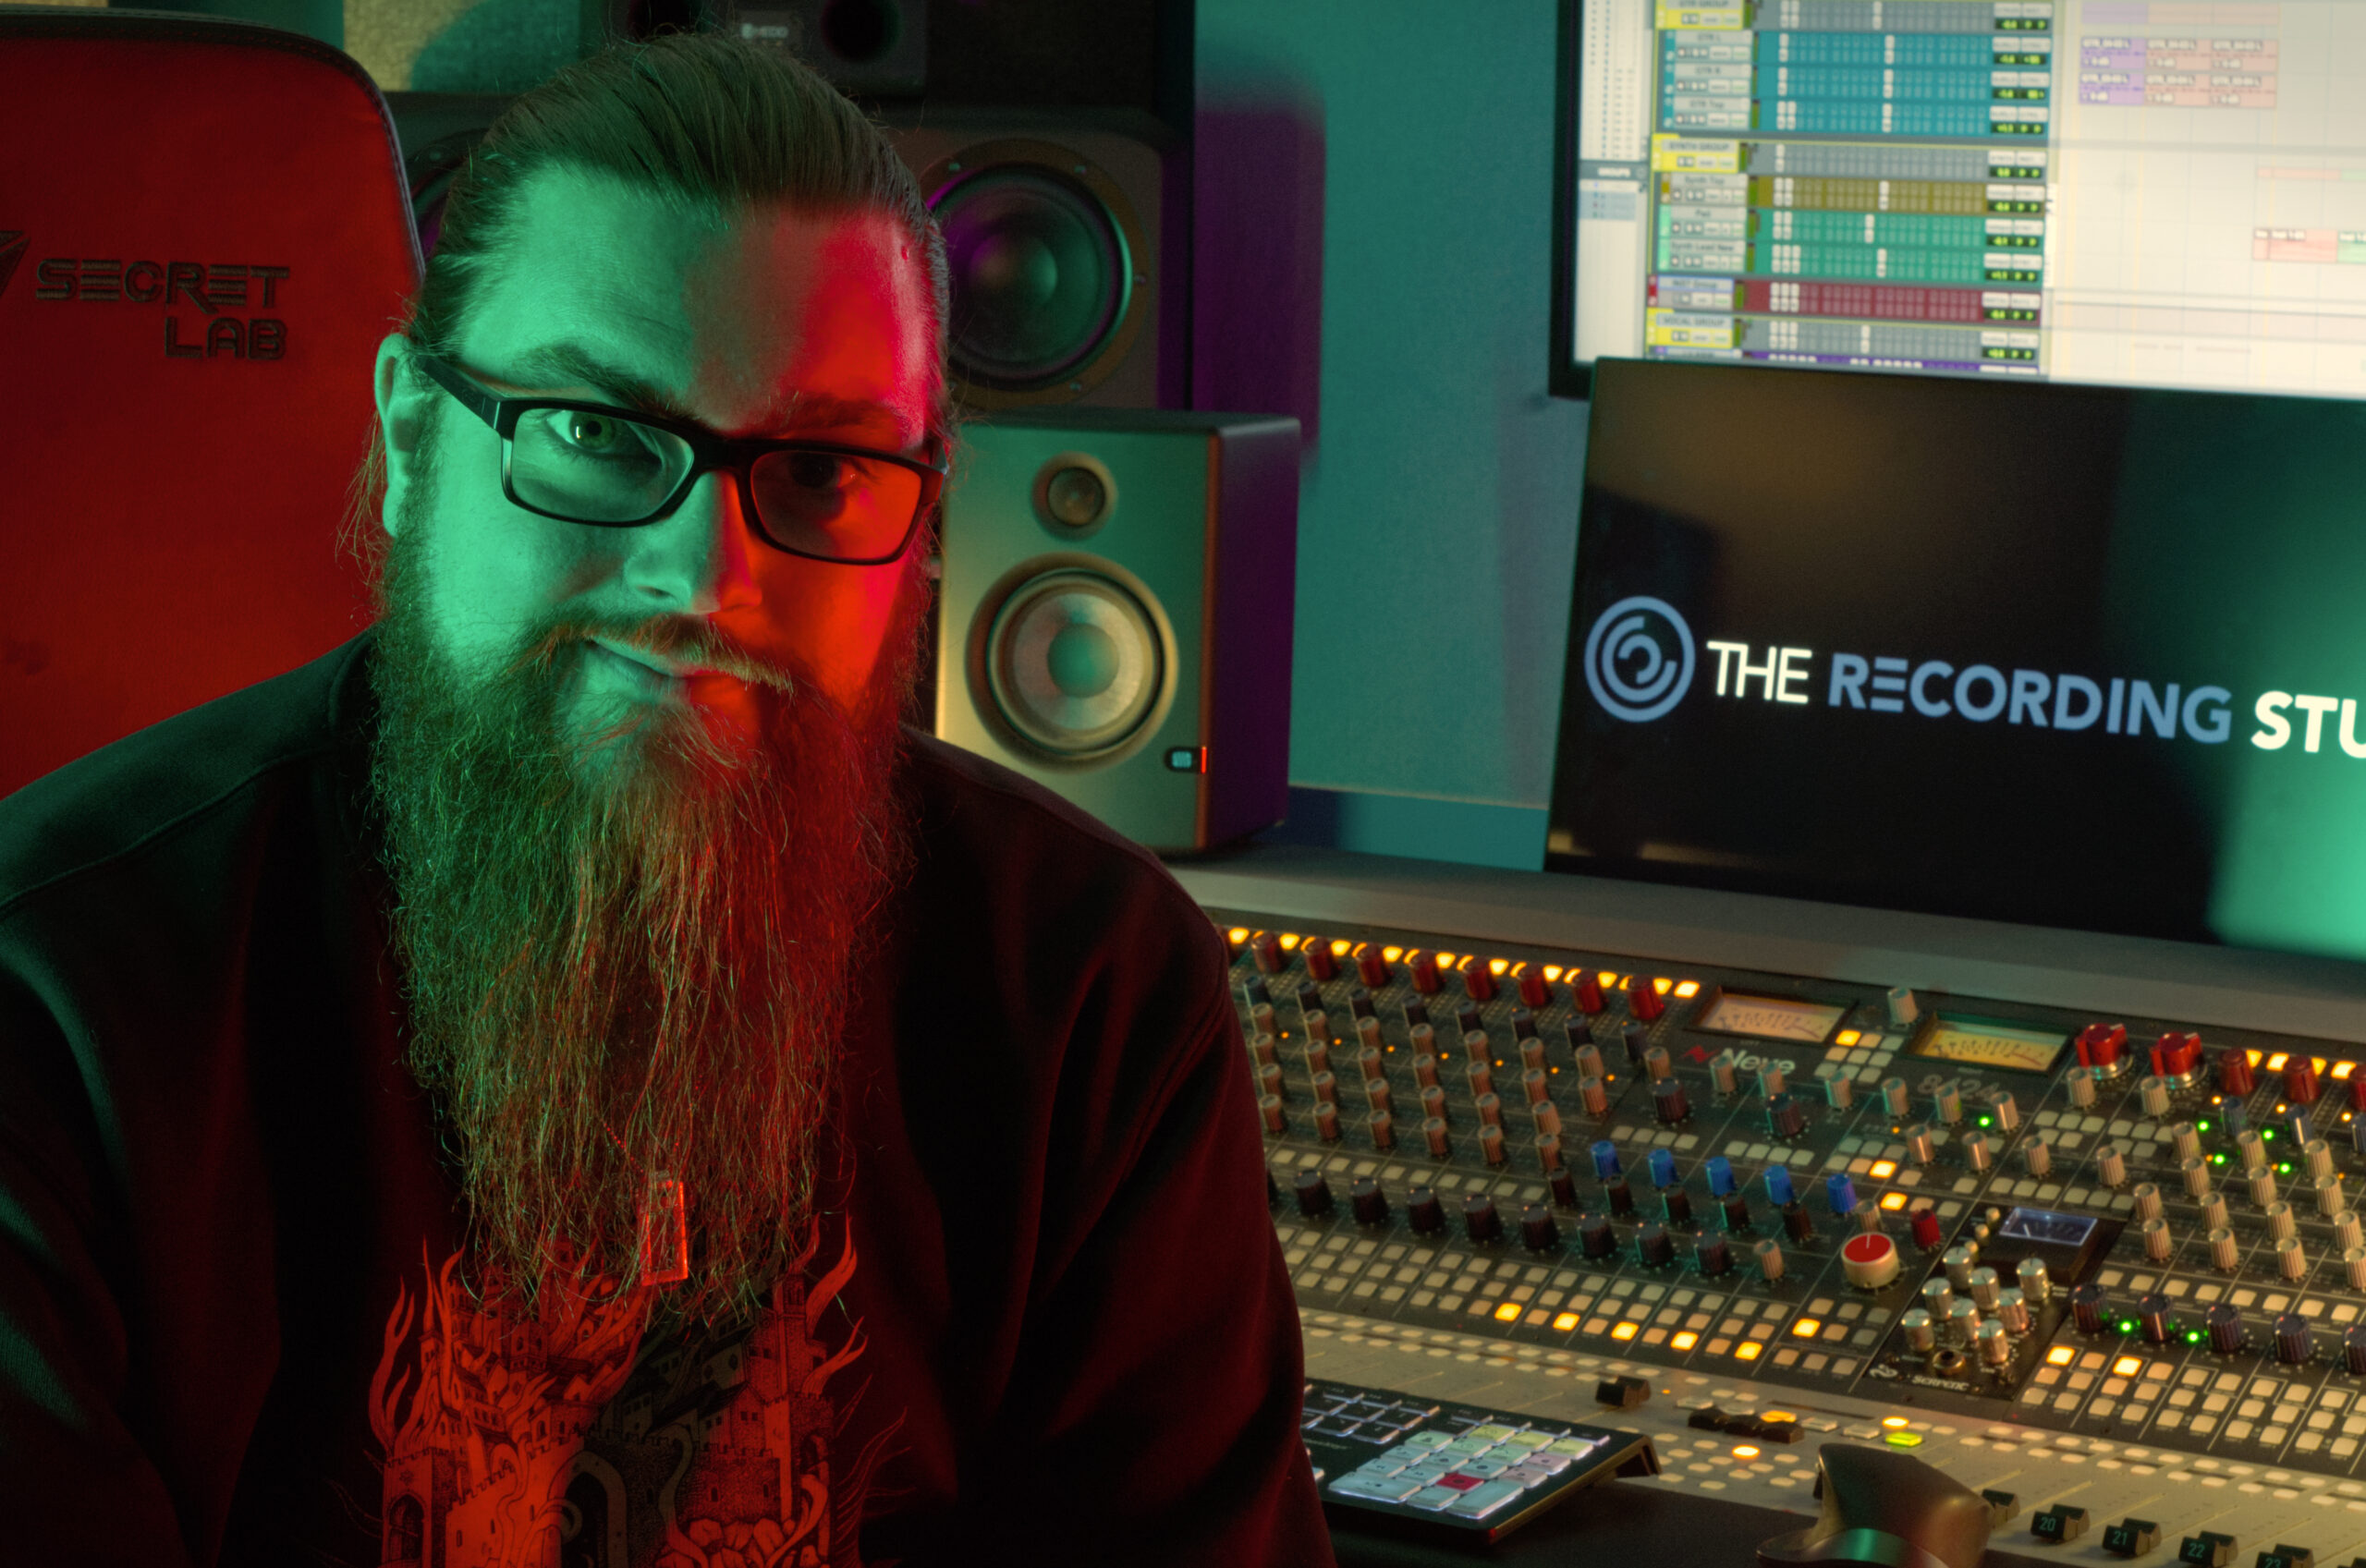 The Recording Studio London adds Automation to its new Neve 8424 Console